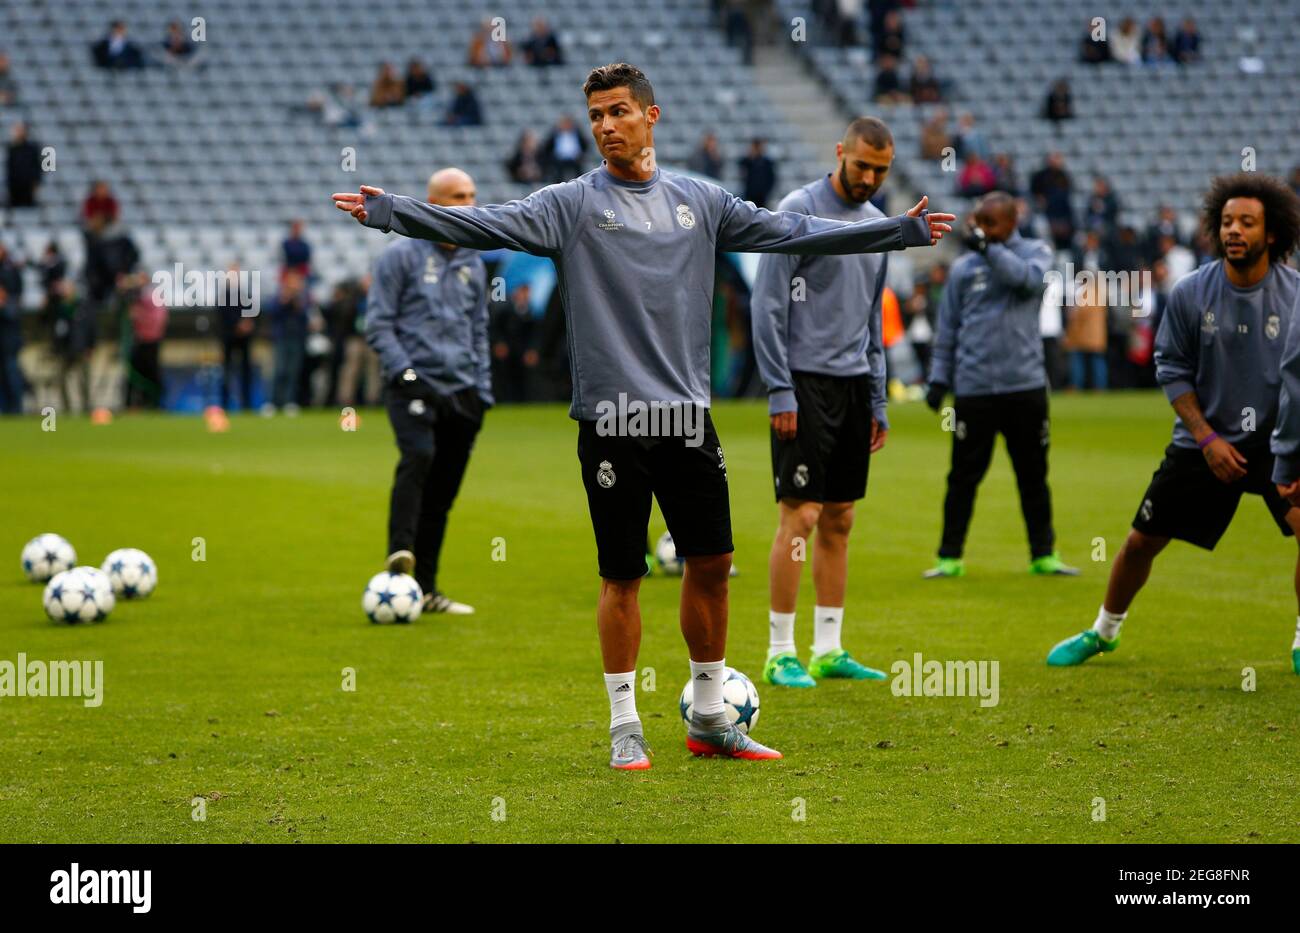 Soccer Football - Real Madrid Training - Allianz Arena, Munich, Germany -  11/4/17 Real Madrid's Cristiano Ronaldo during training Reuters / Michaela  Rehle Livepic Stock Photo - Alamy